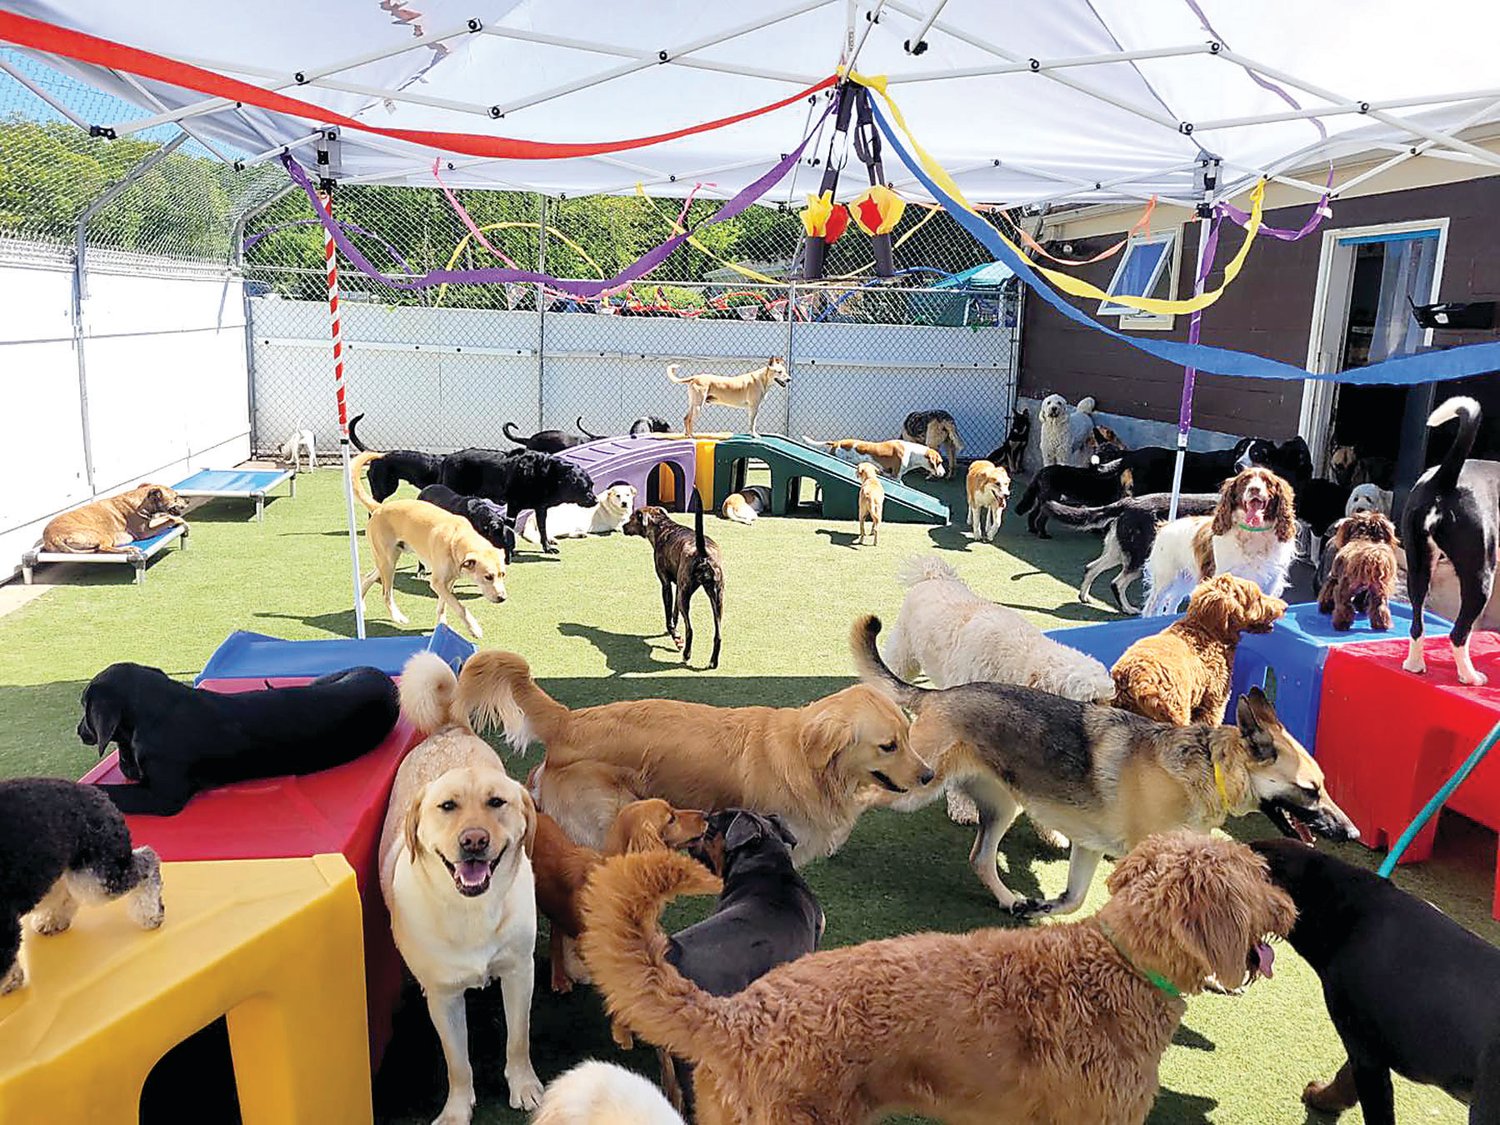 Dogs dazzle on the decorated dance floor.